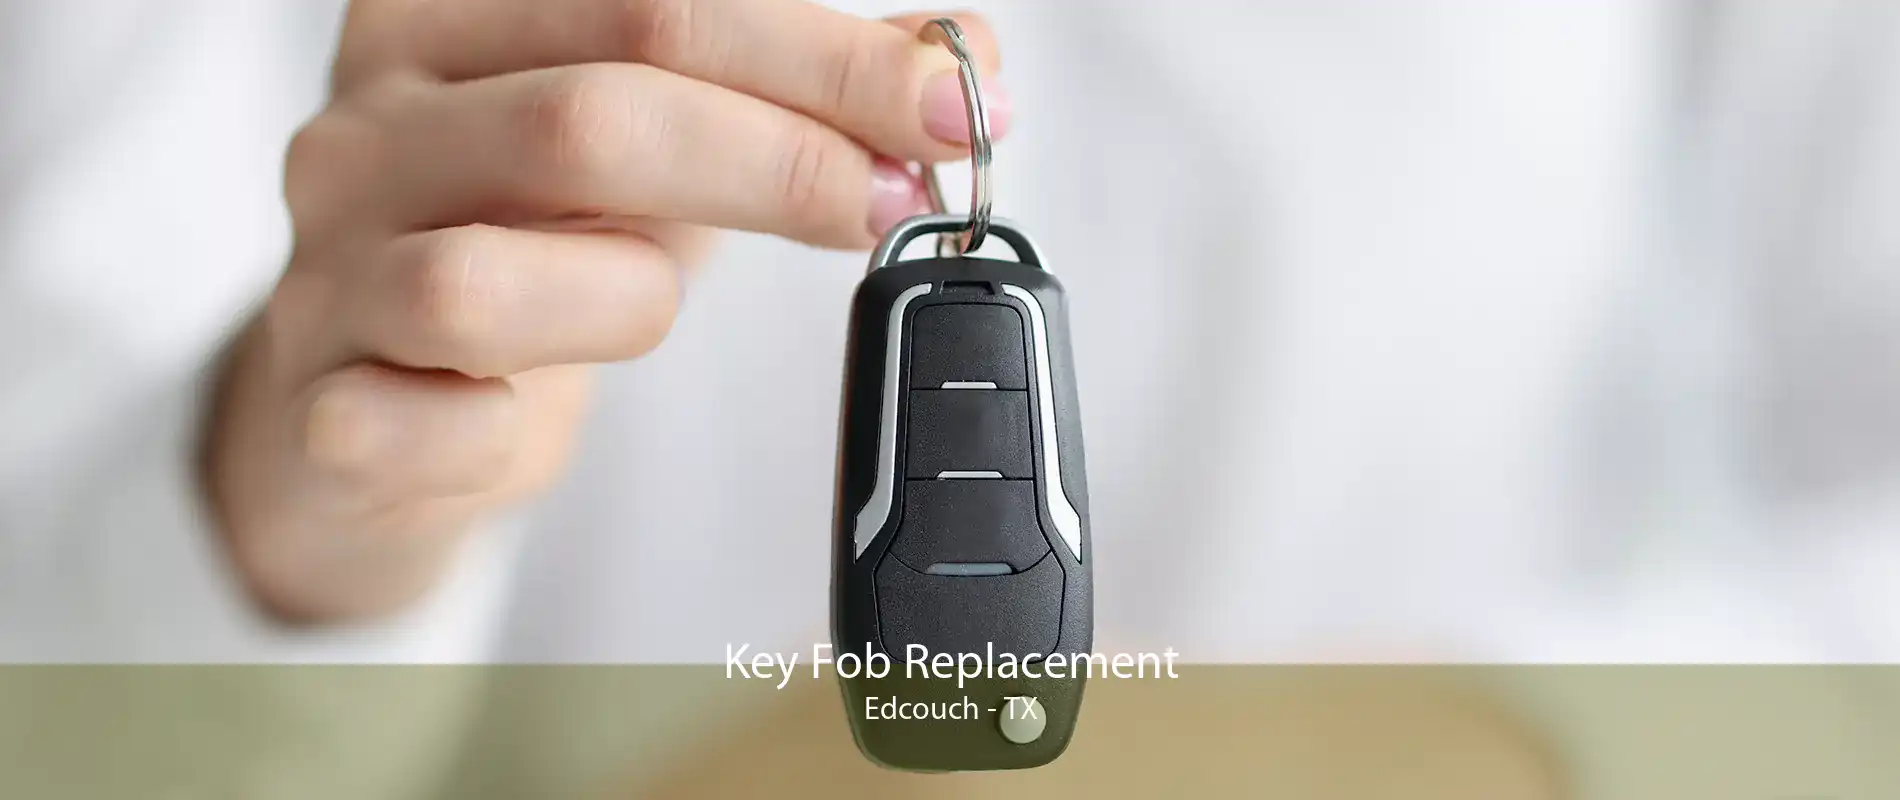 Key Fob Replacement Edcouch - TX